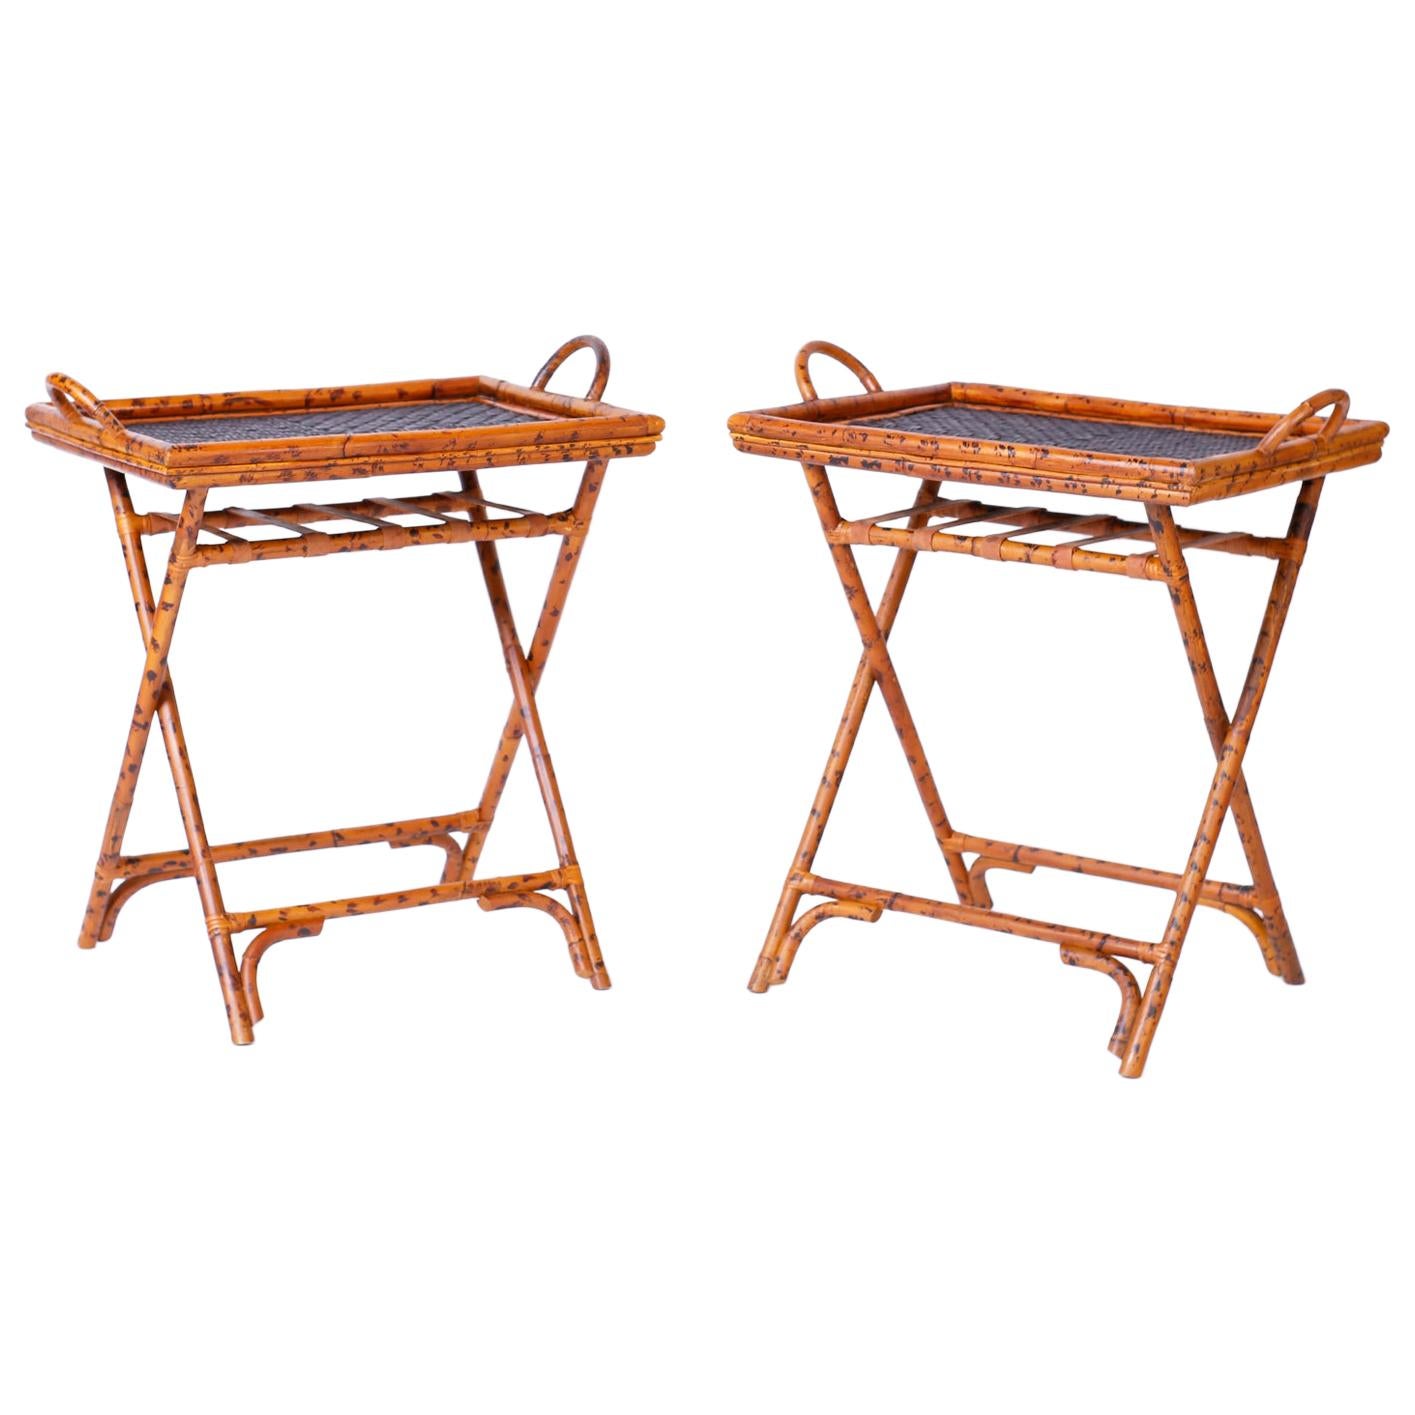 Pair of Midcentury British Colonial Style Bamboo Tray Tables